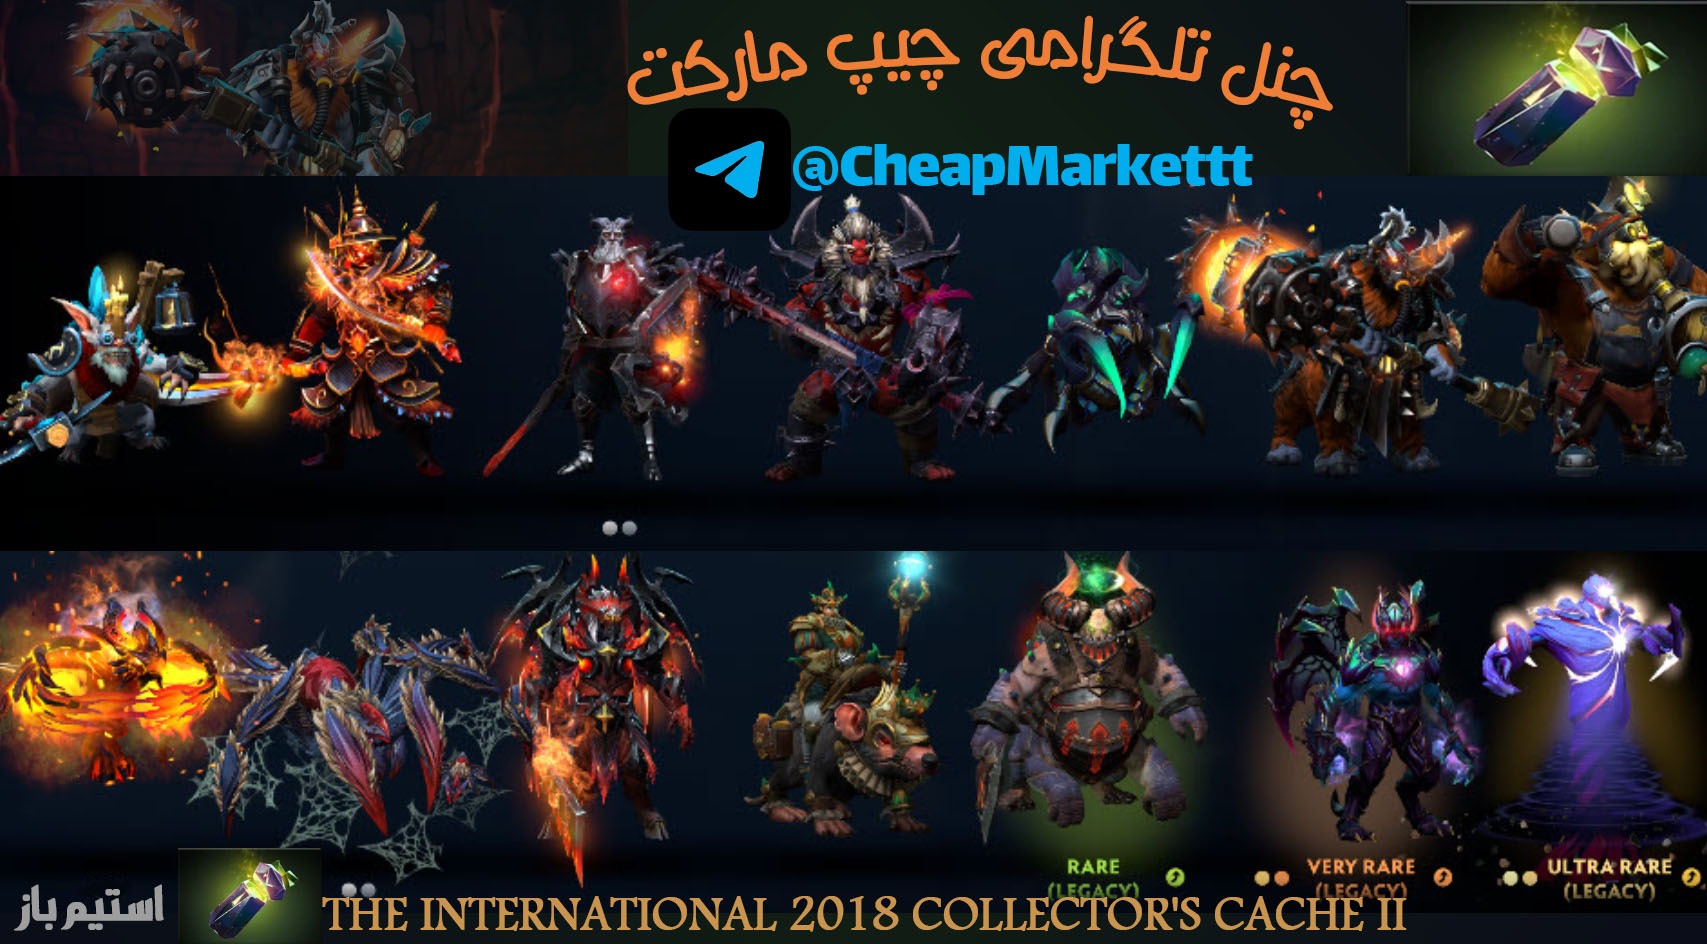 The International 2018 Collector's Cache II